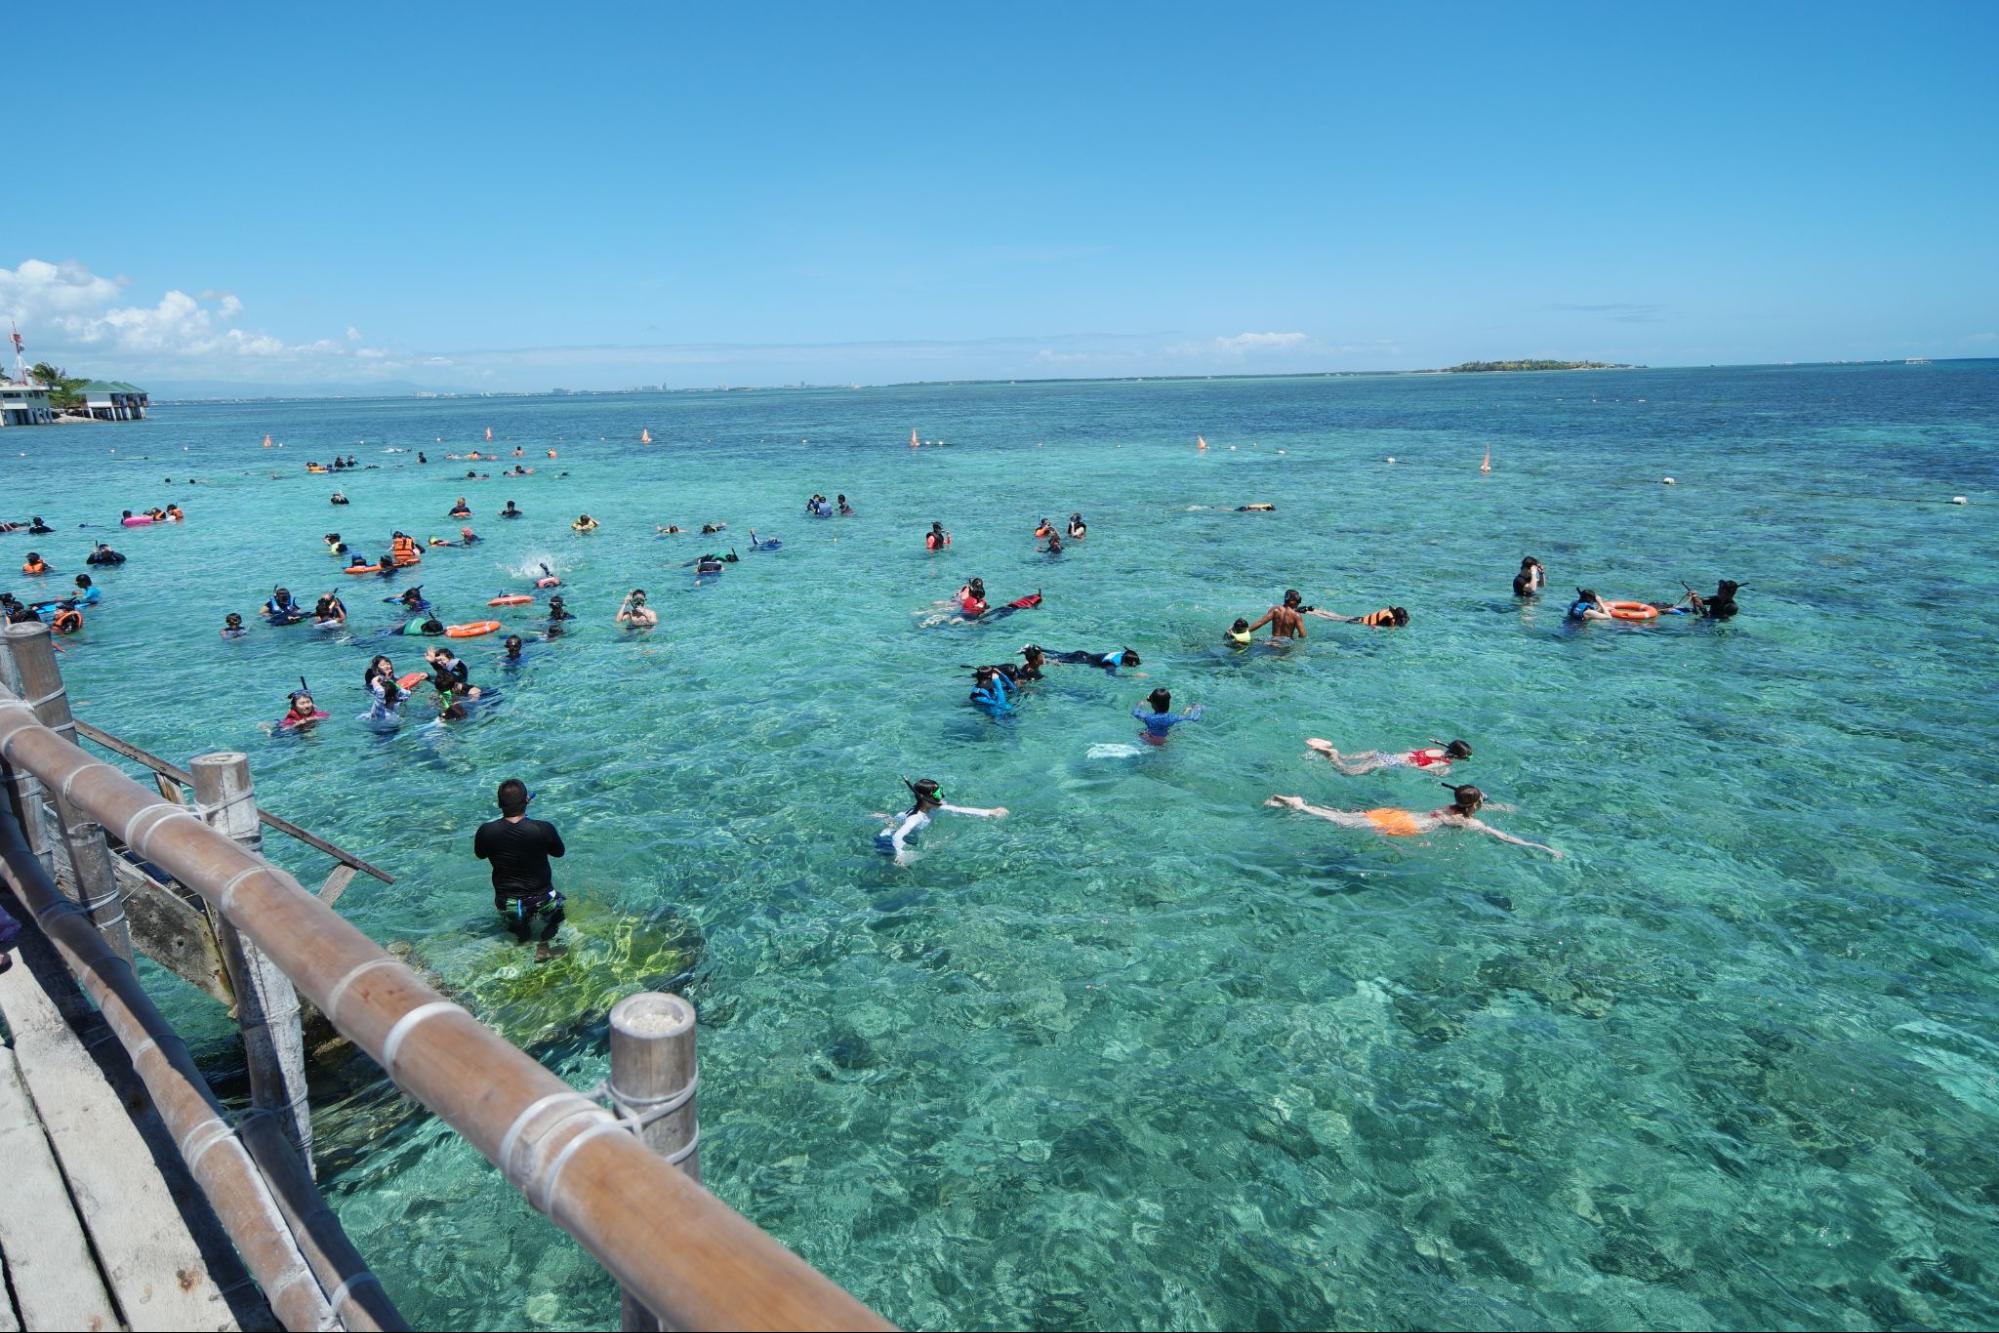  7 Must-Visit Places in the Philippines - Island-hopping from Mactan Island - Nalusuan Island